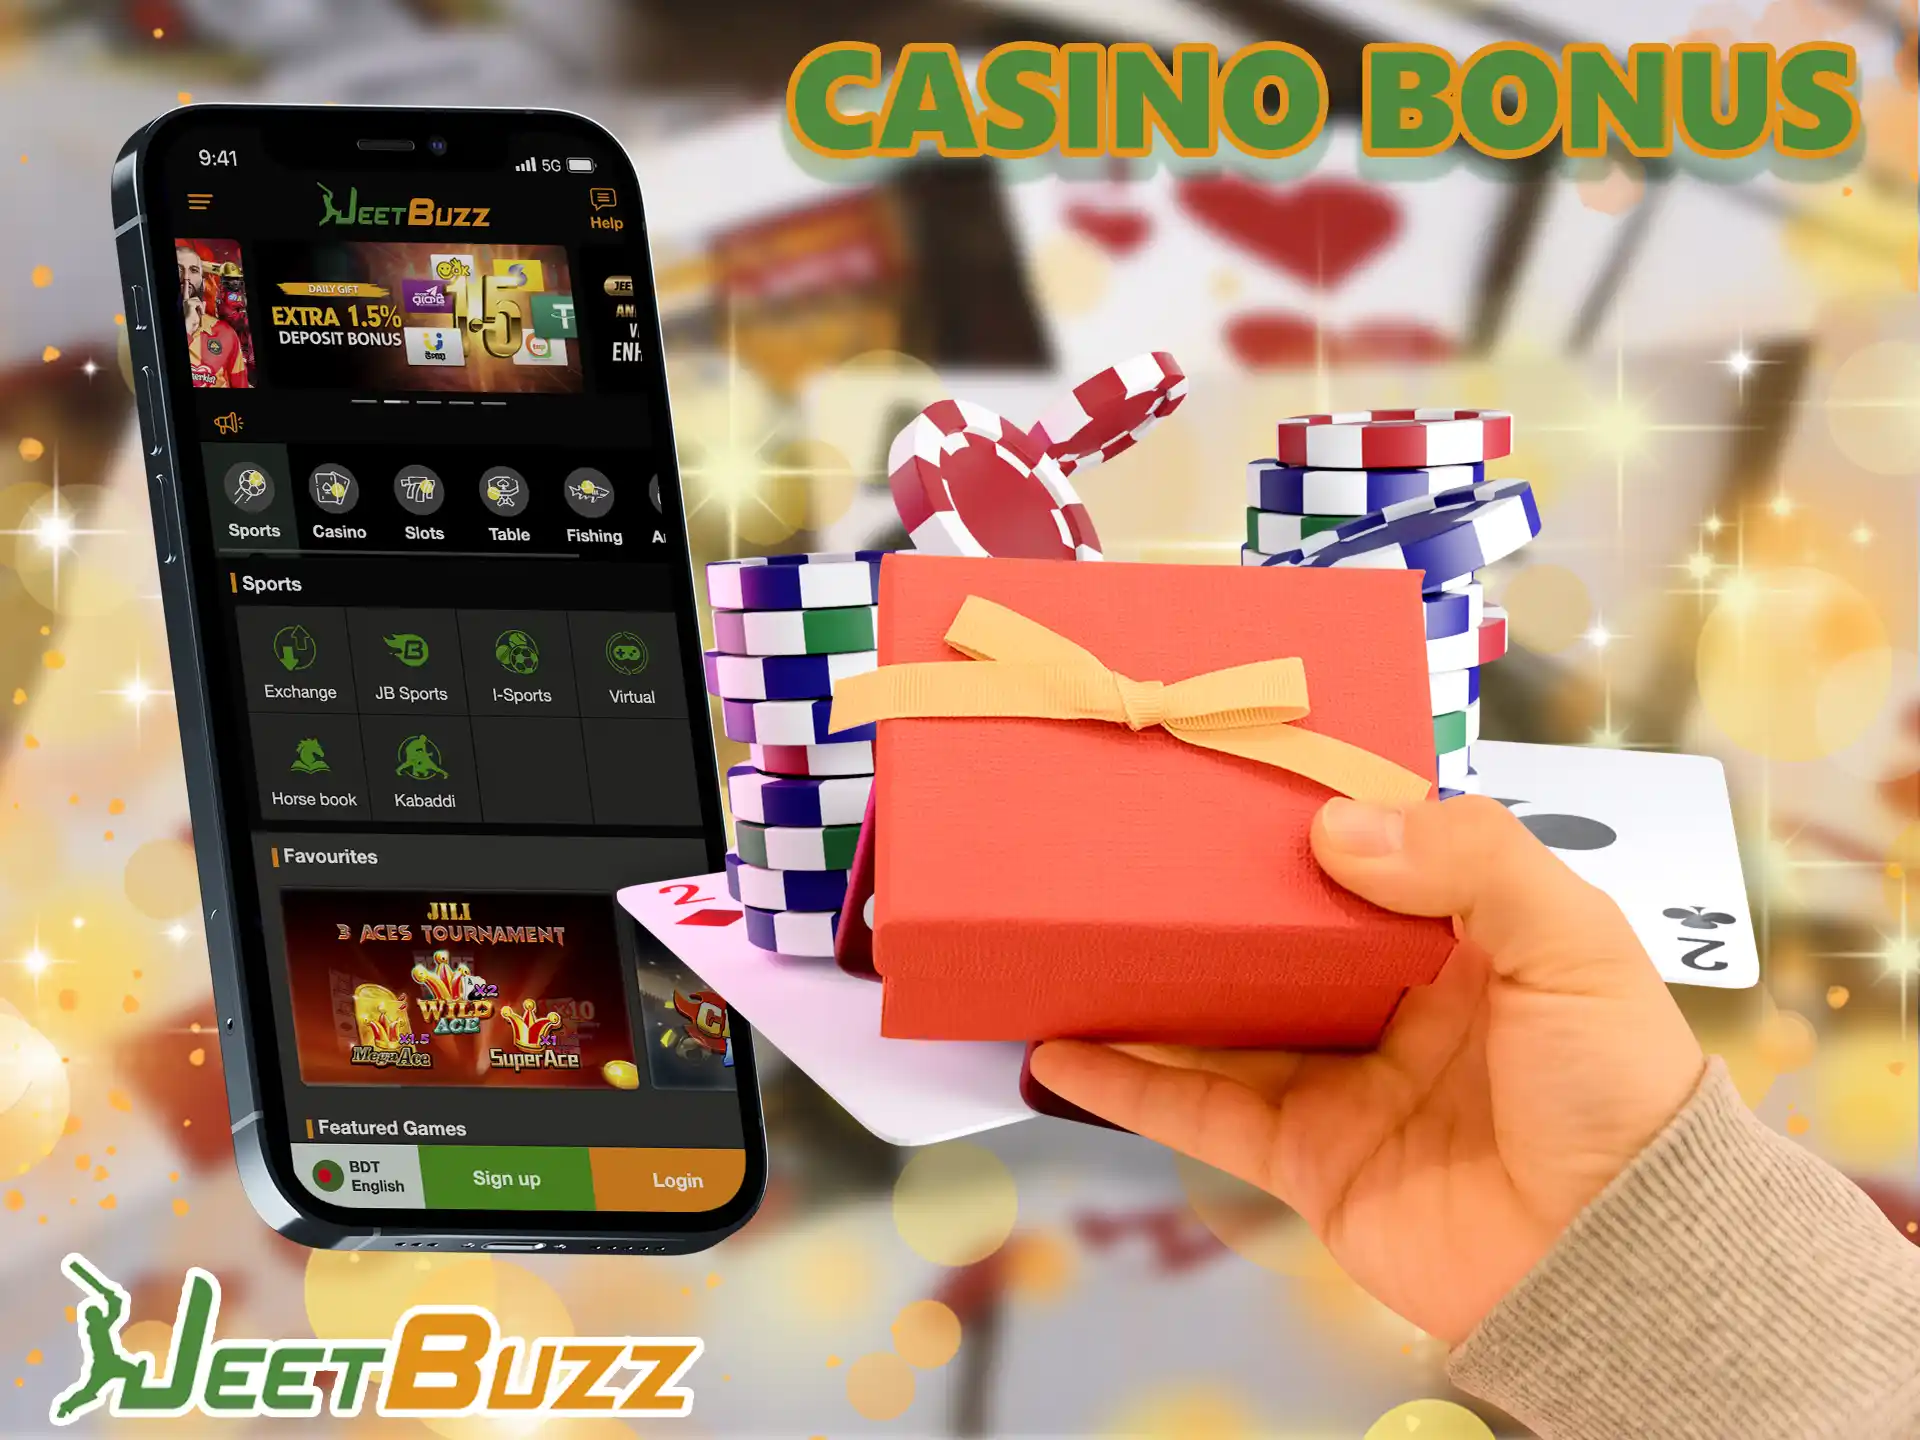 If you're a gambling person - then this compliments of JeetBuzz is tailor-made for you, just fund your account and it will be credited immediately.